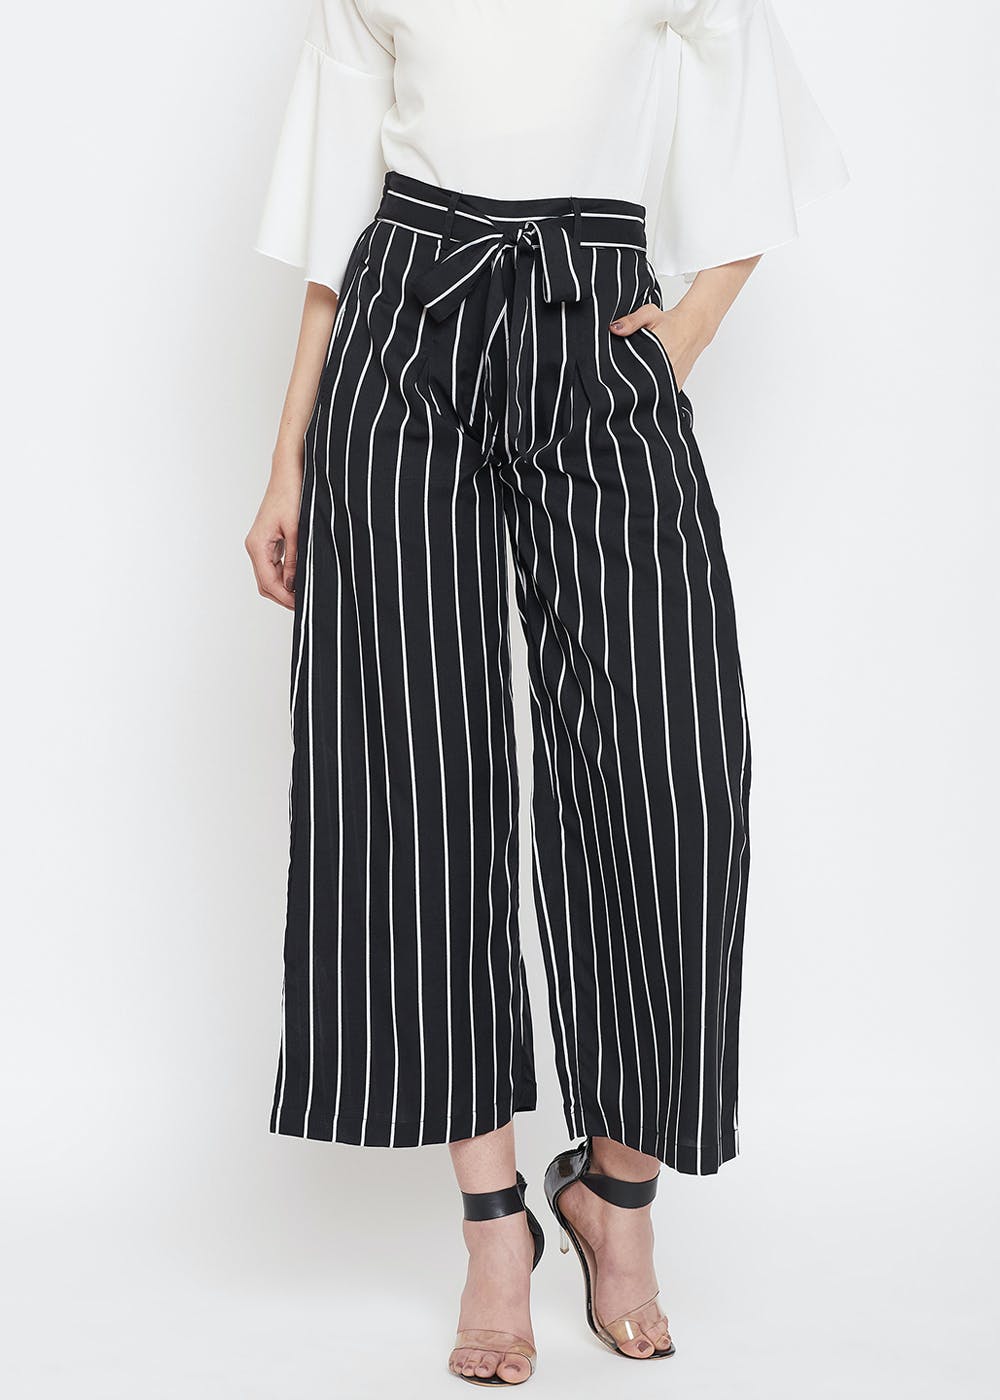 Get Waist Tie Monochrome Striped Poly Crepe Flared Trousers at ₹ 499